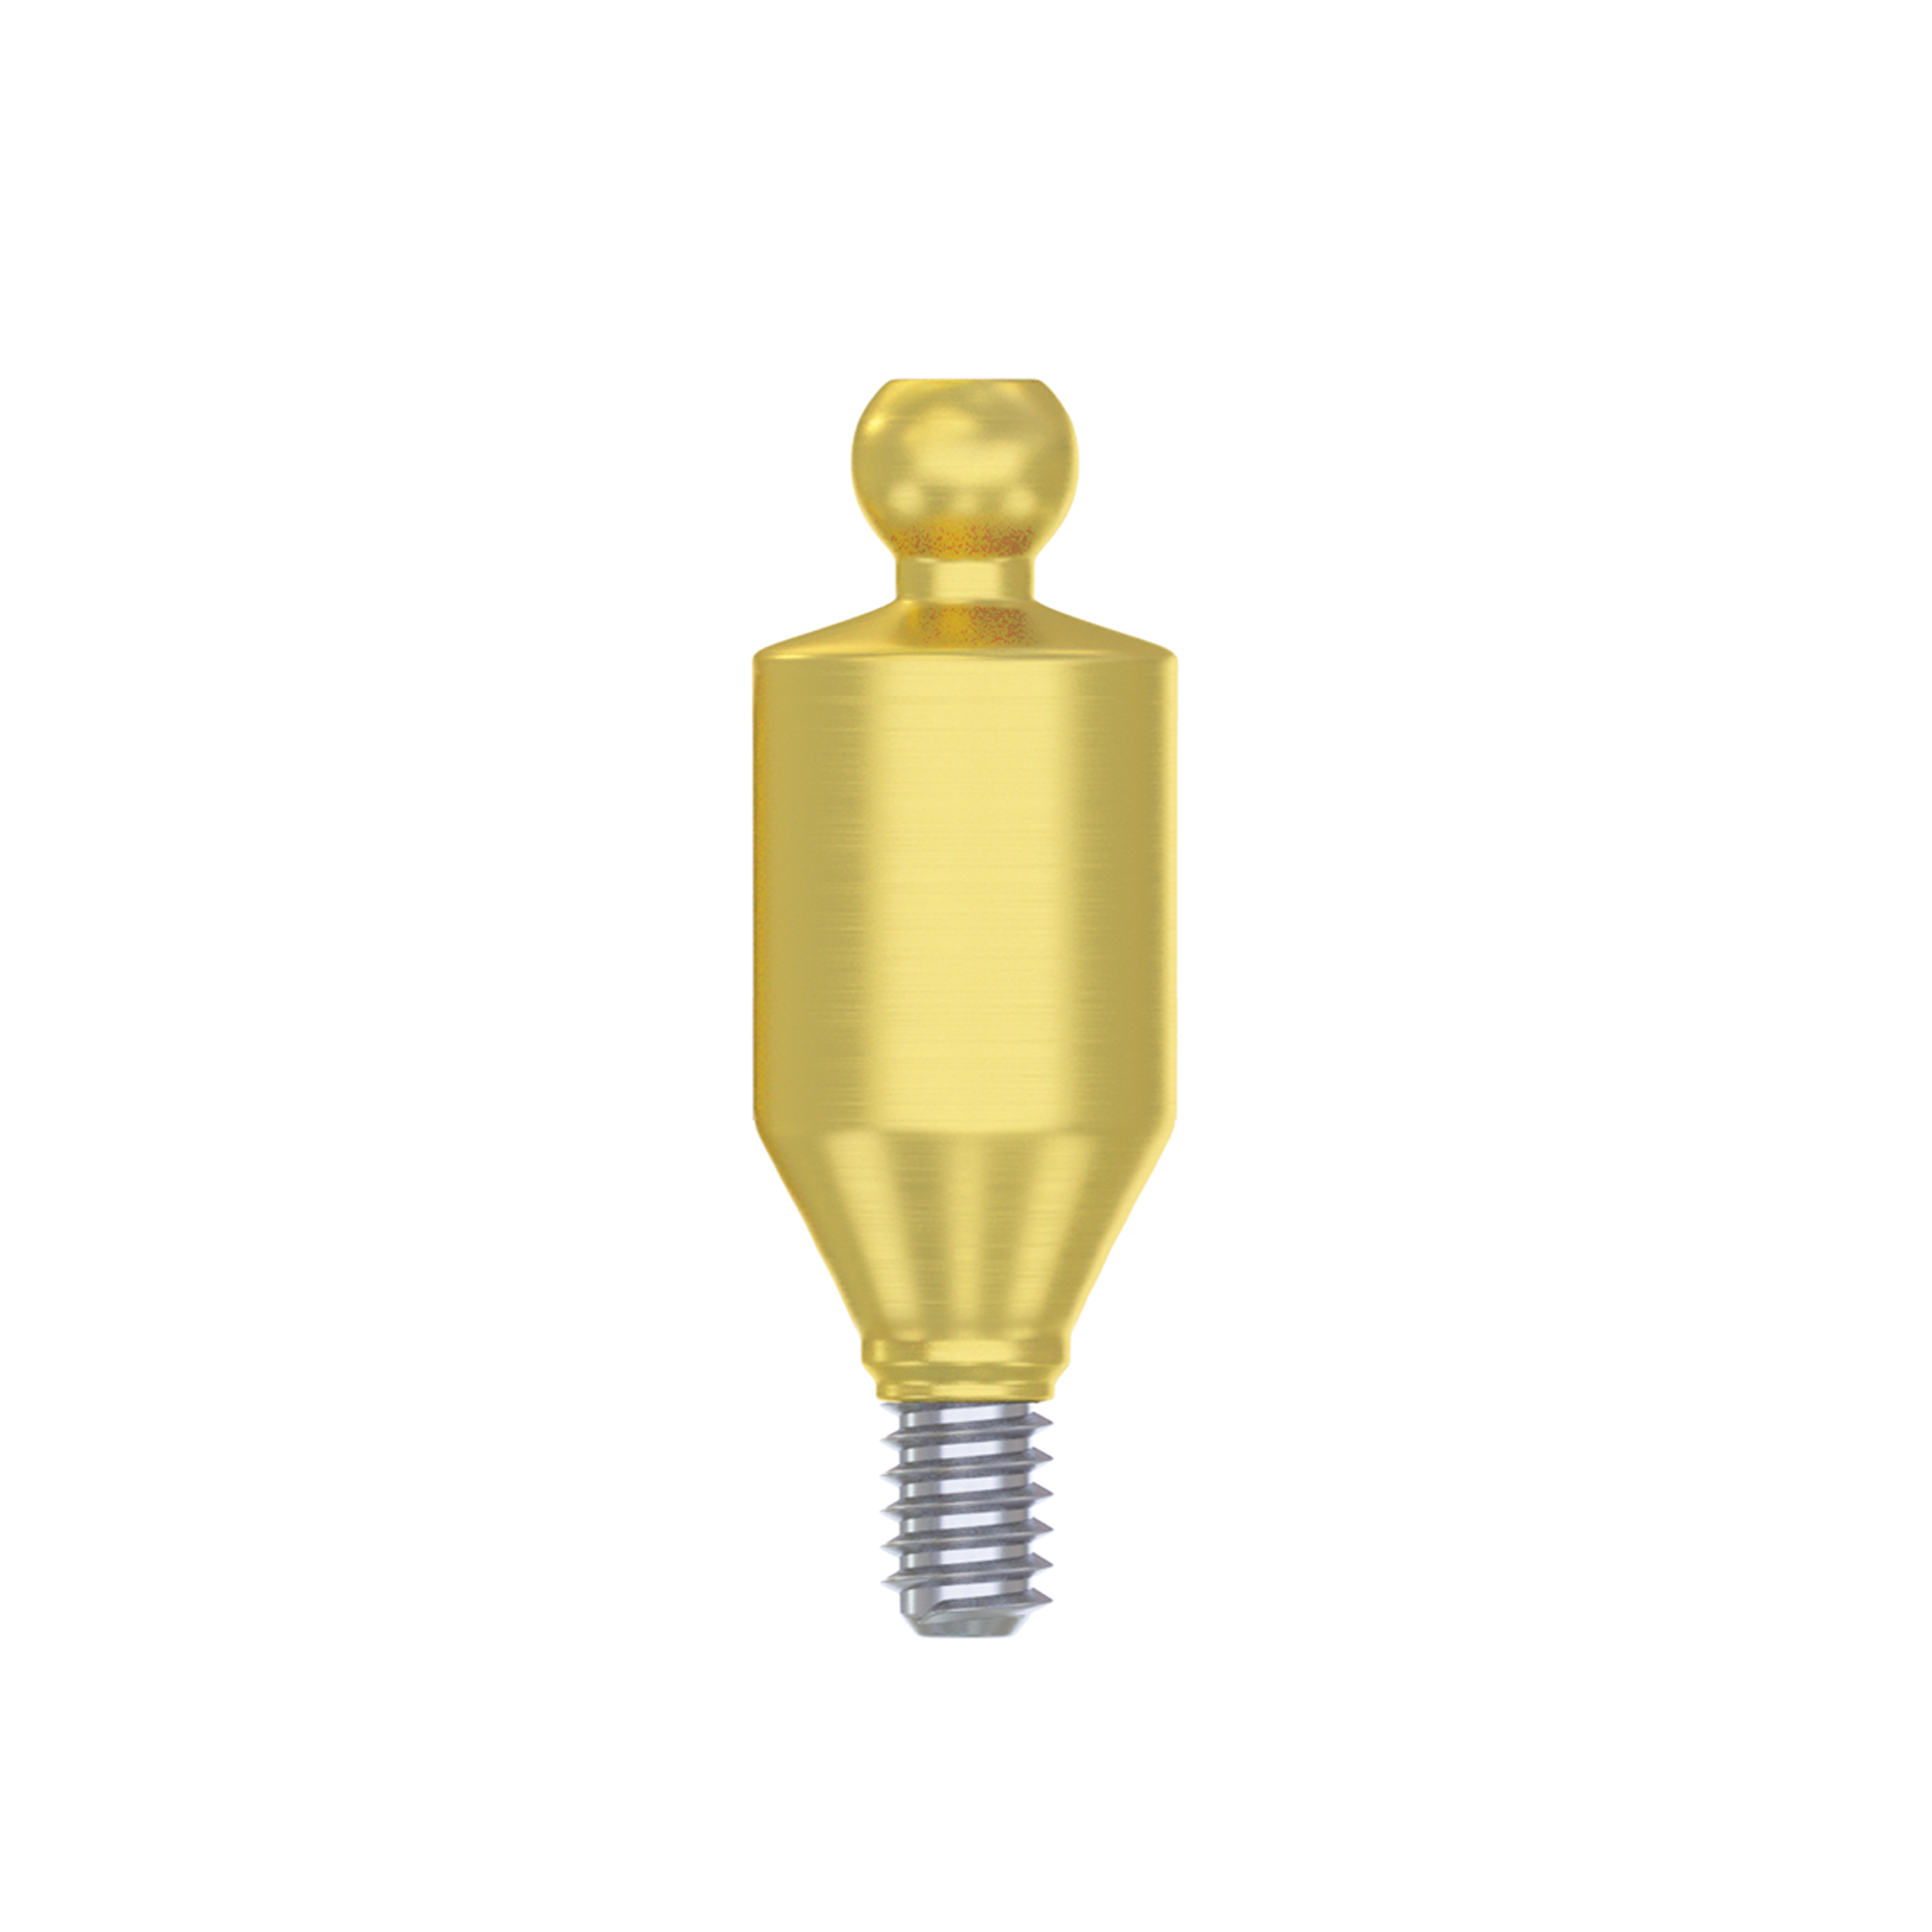 DSI Straight Ball Attachment 5.0mm  - Conical Connection RP Ø4.3-5.0mm